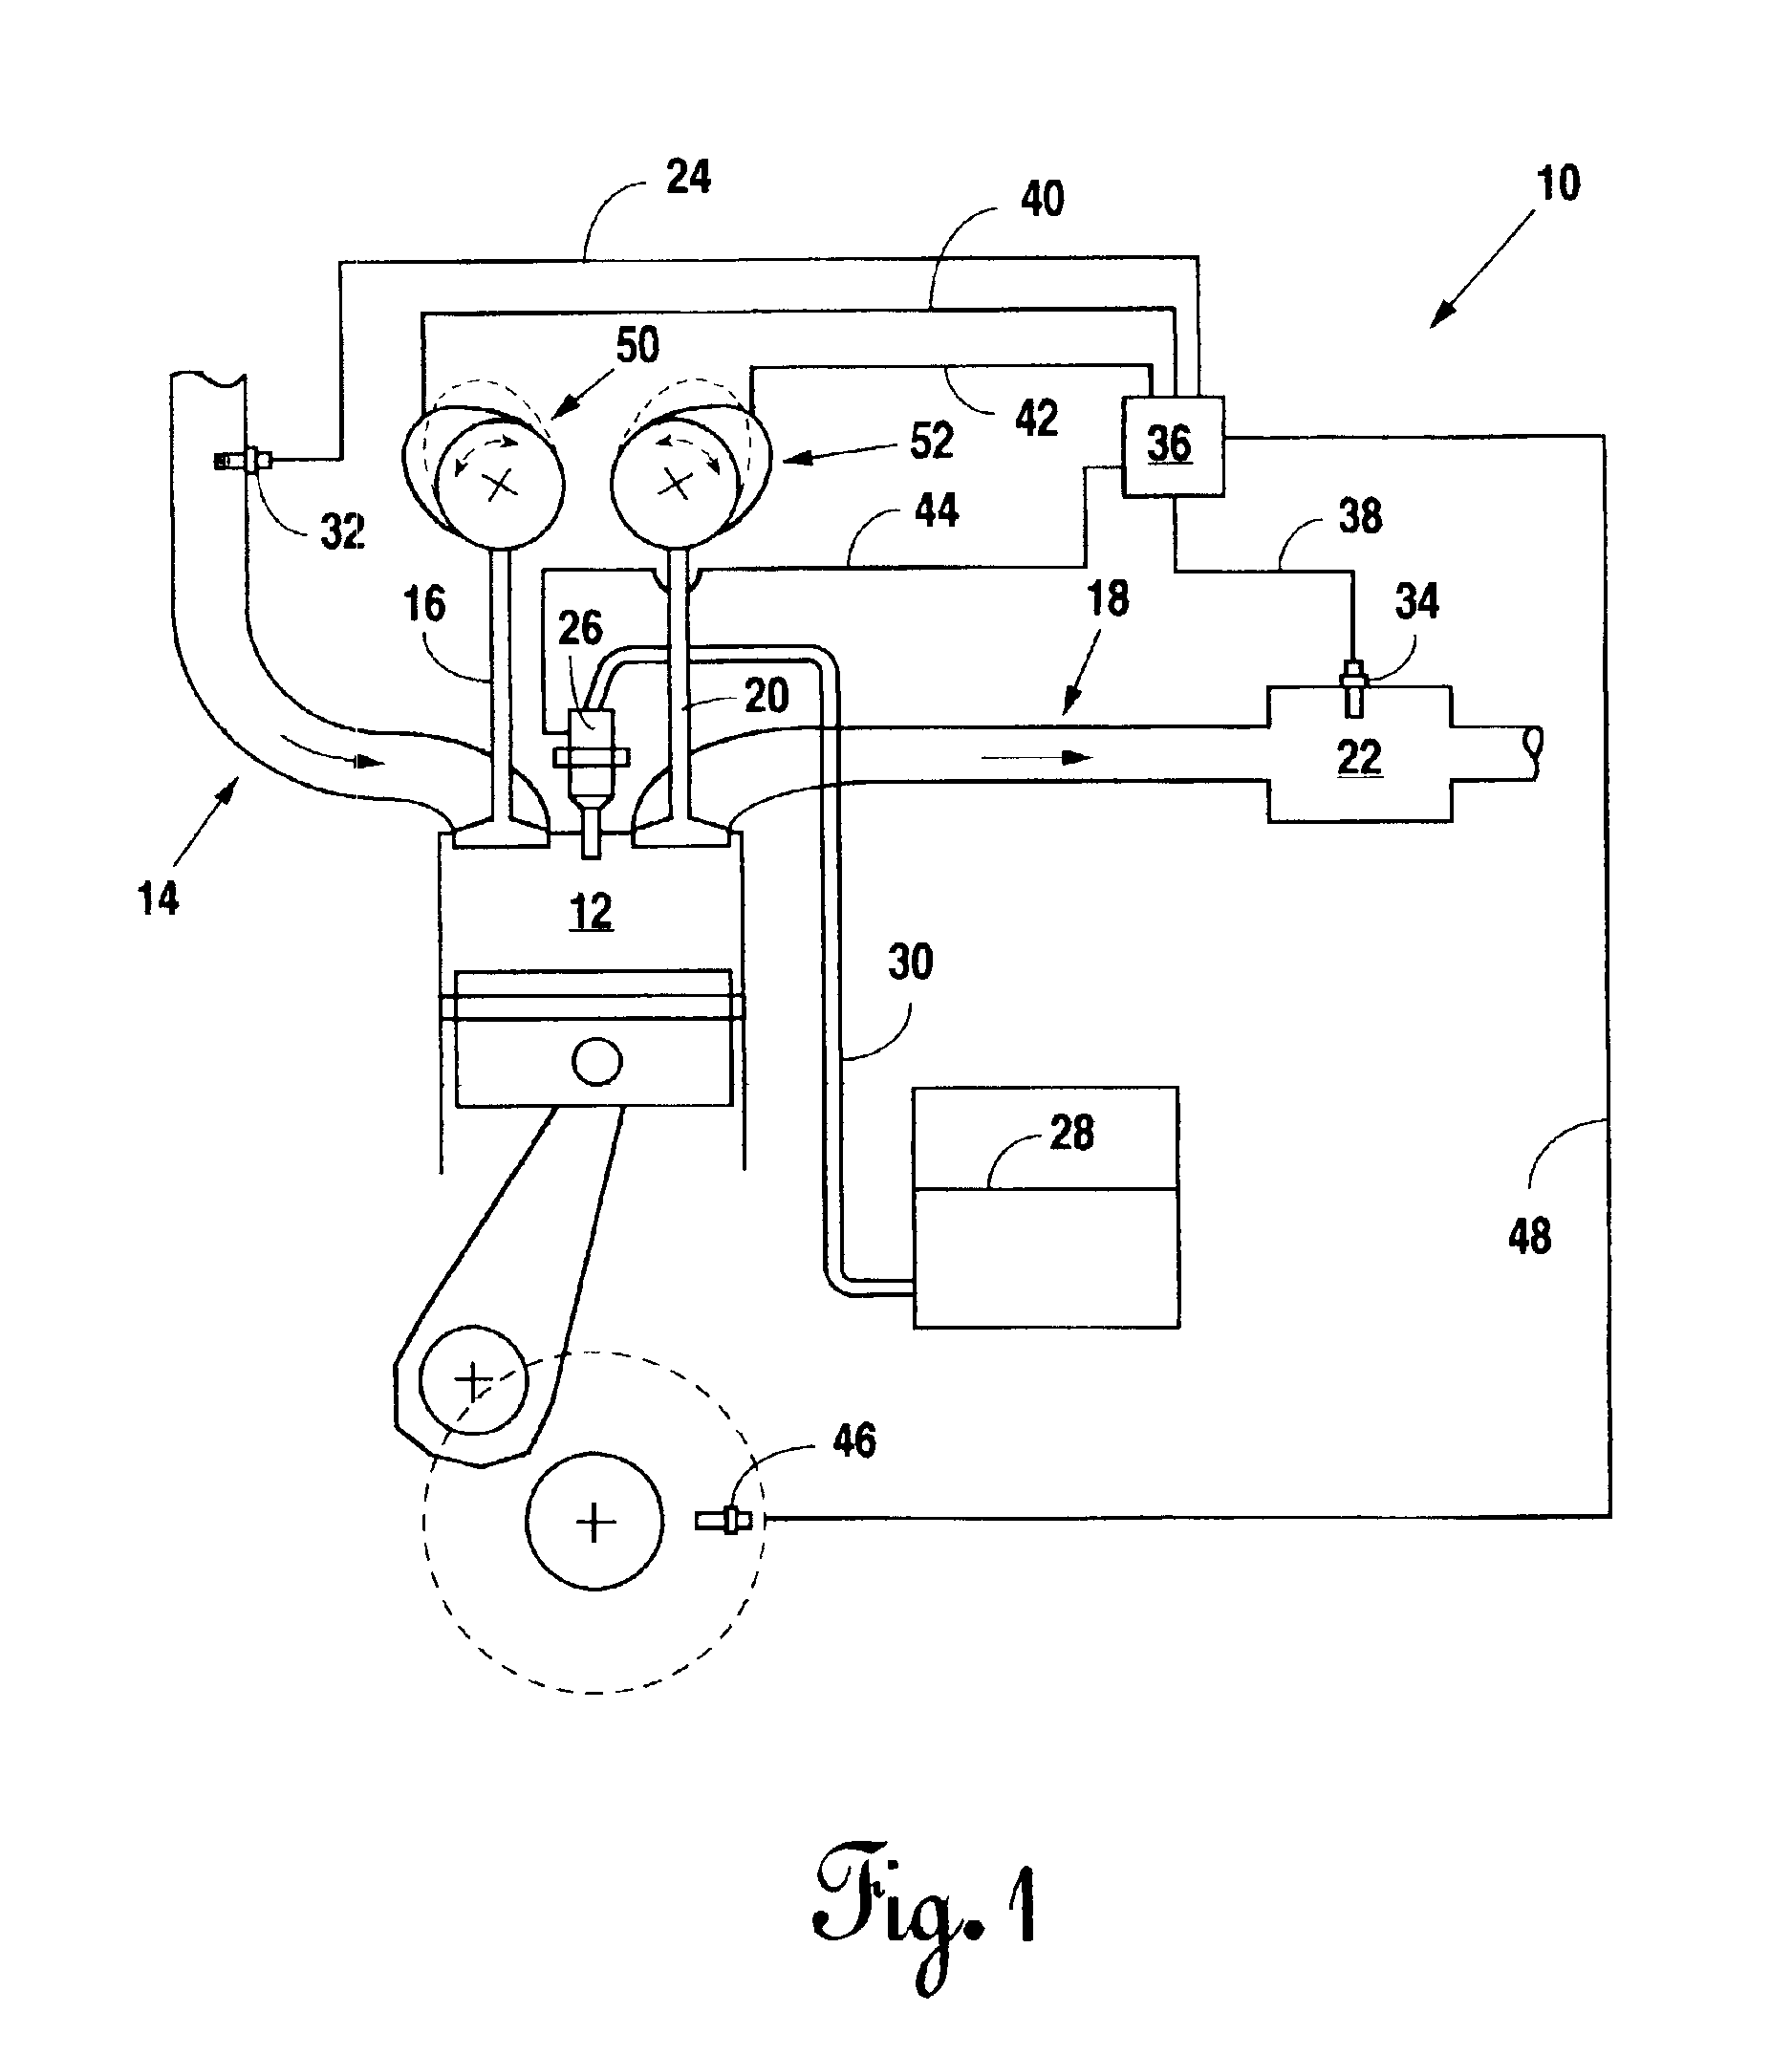 Use of a variable valve actuation system to control the exhaust gas temperature and space velocity of aftertreatment system feedgas